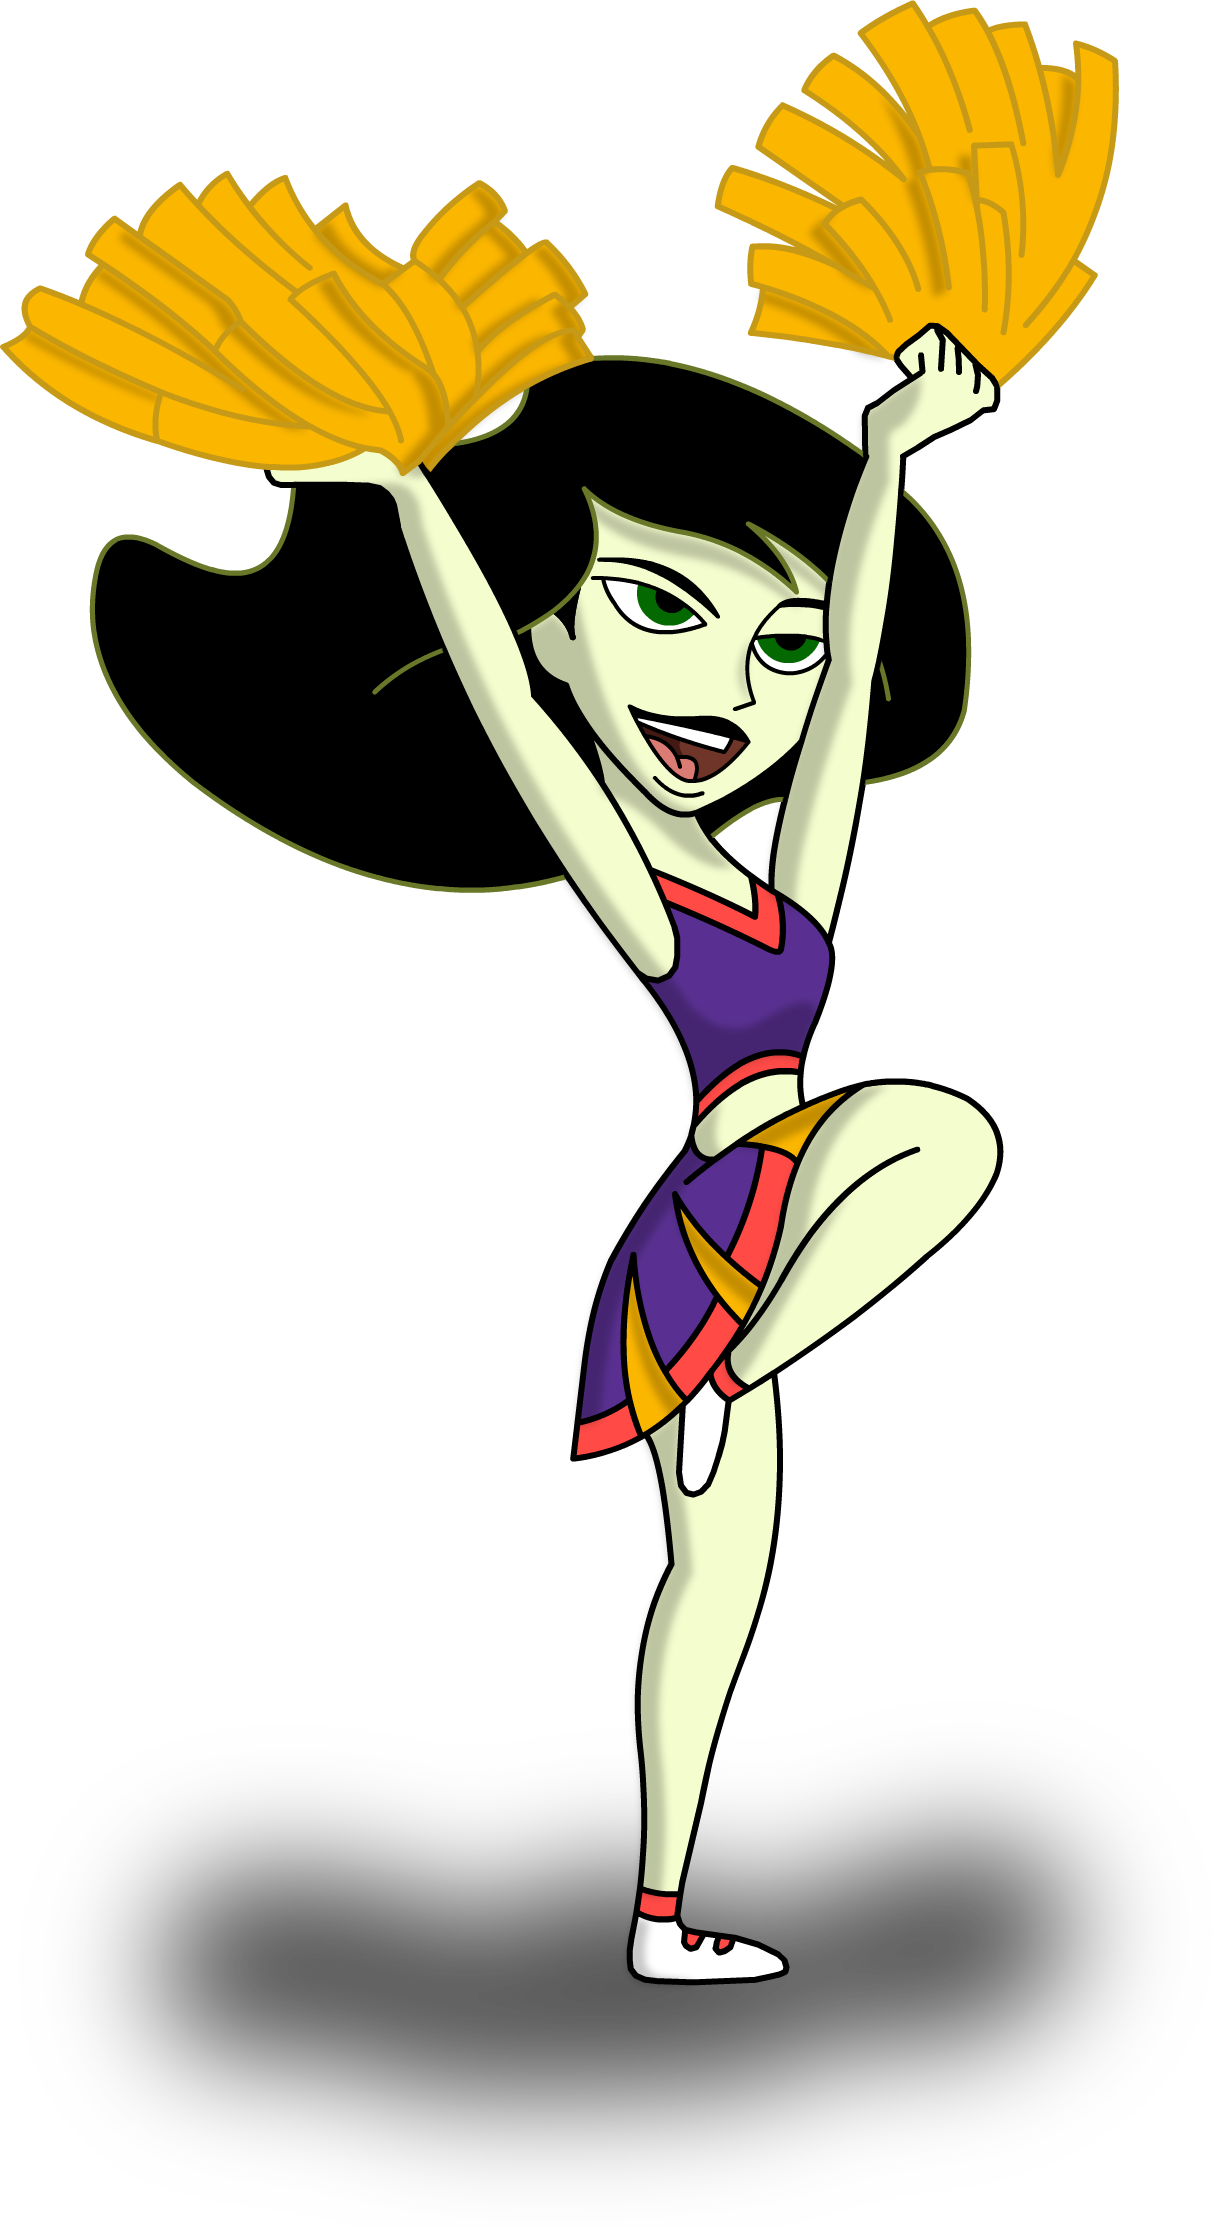 Free Download Cheerleader Clipart Black And White - Kim Possible Cheer Outf...